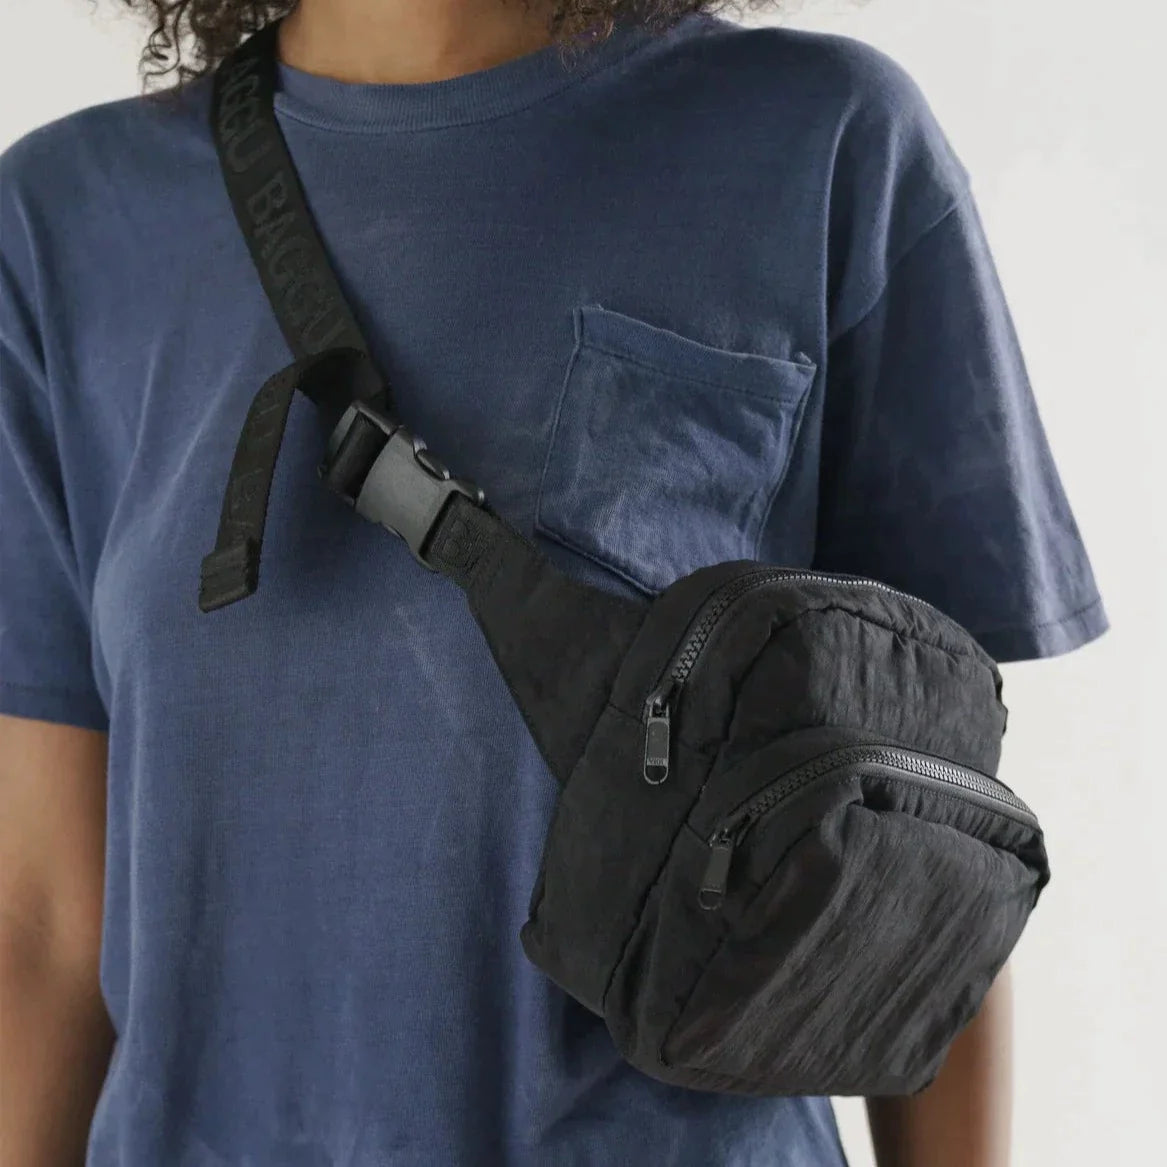 Black Fanny Pack with Black Zippers and Black Strap with De-bossed "BAGGU" text